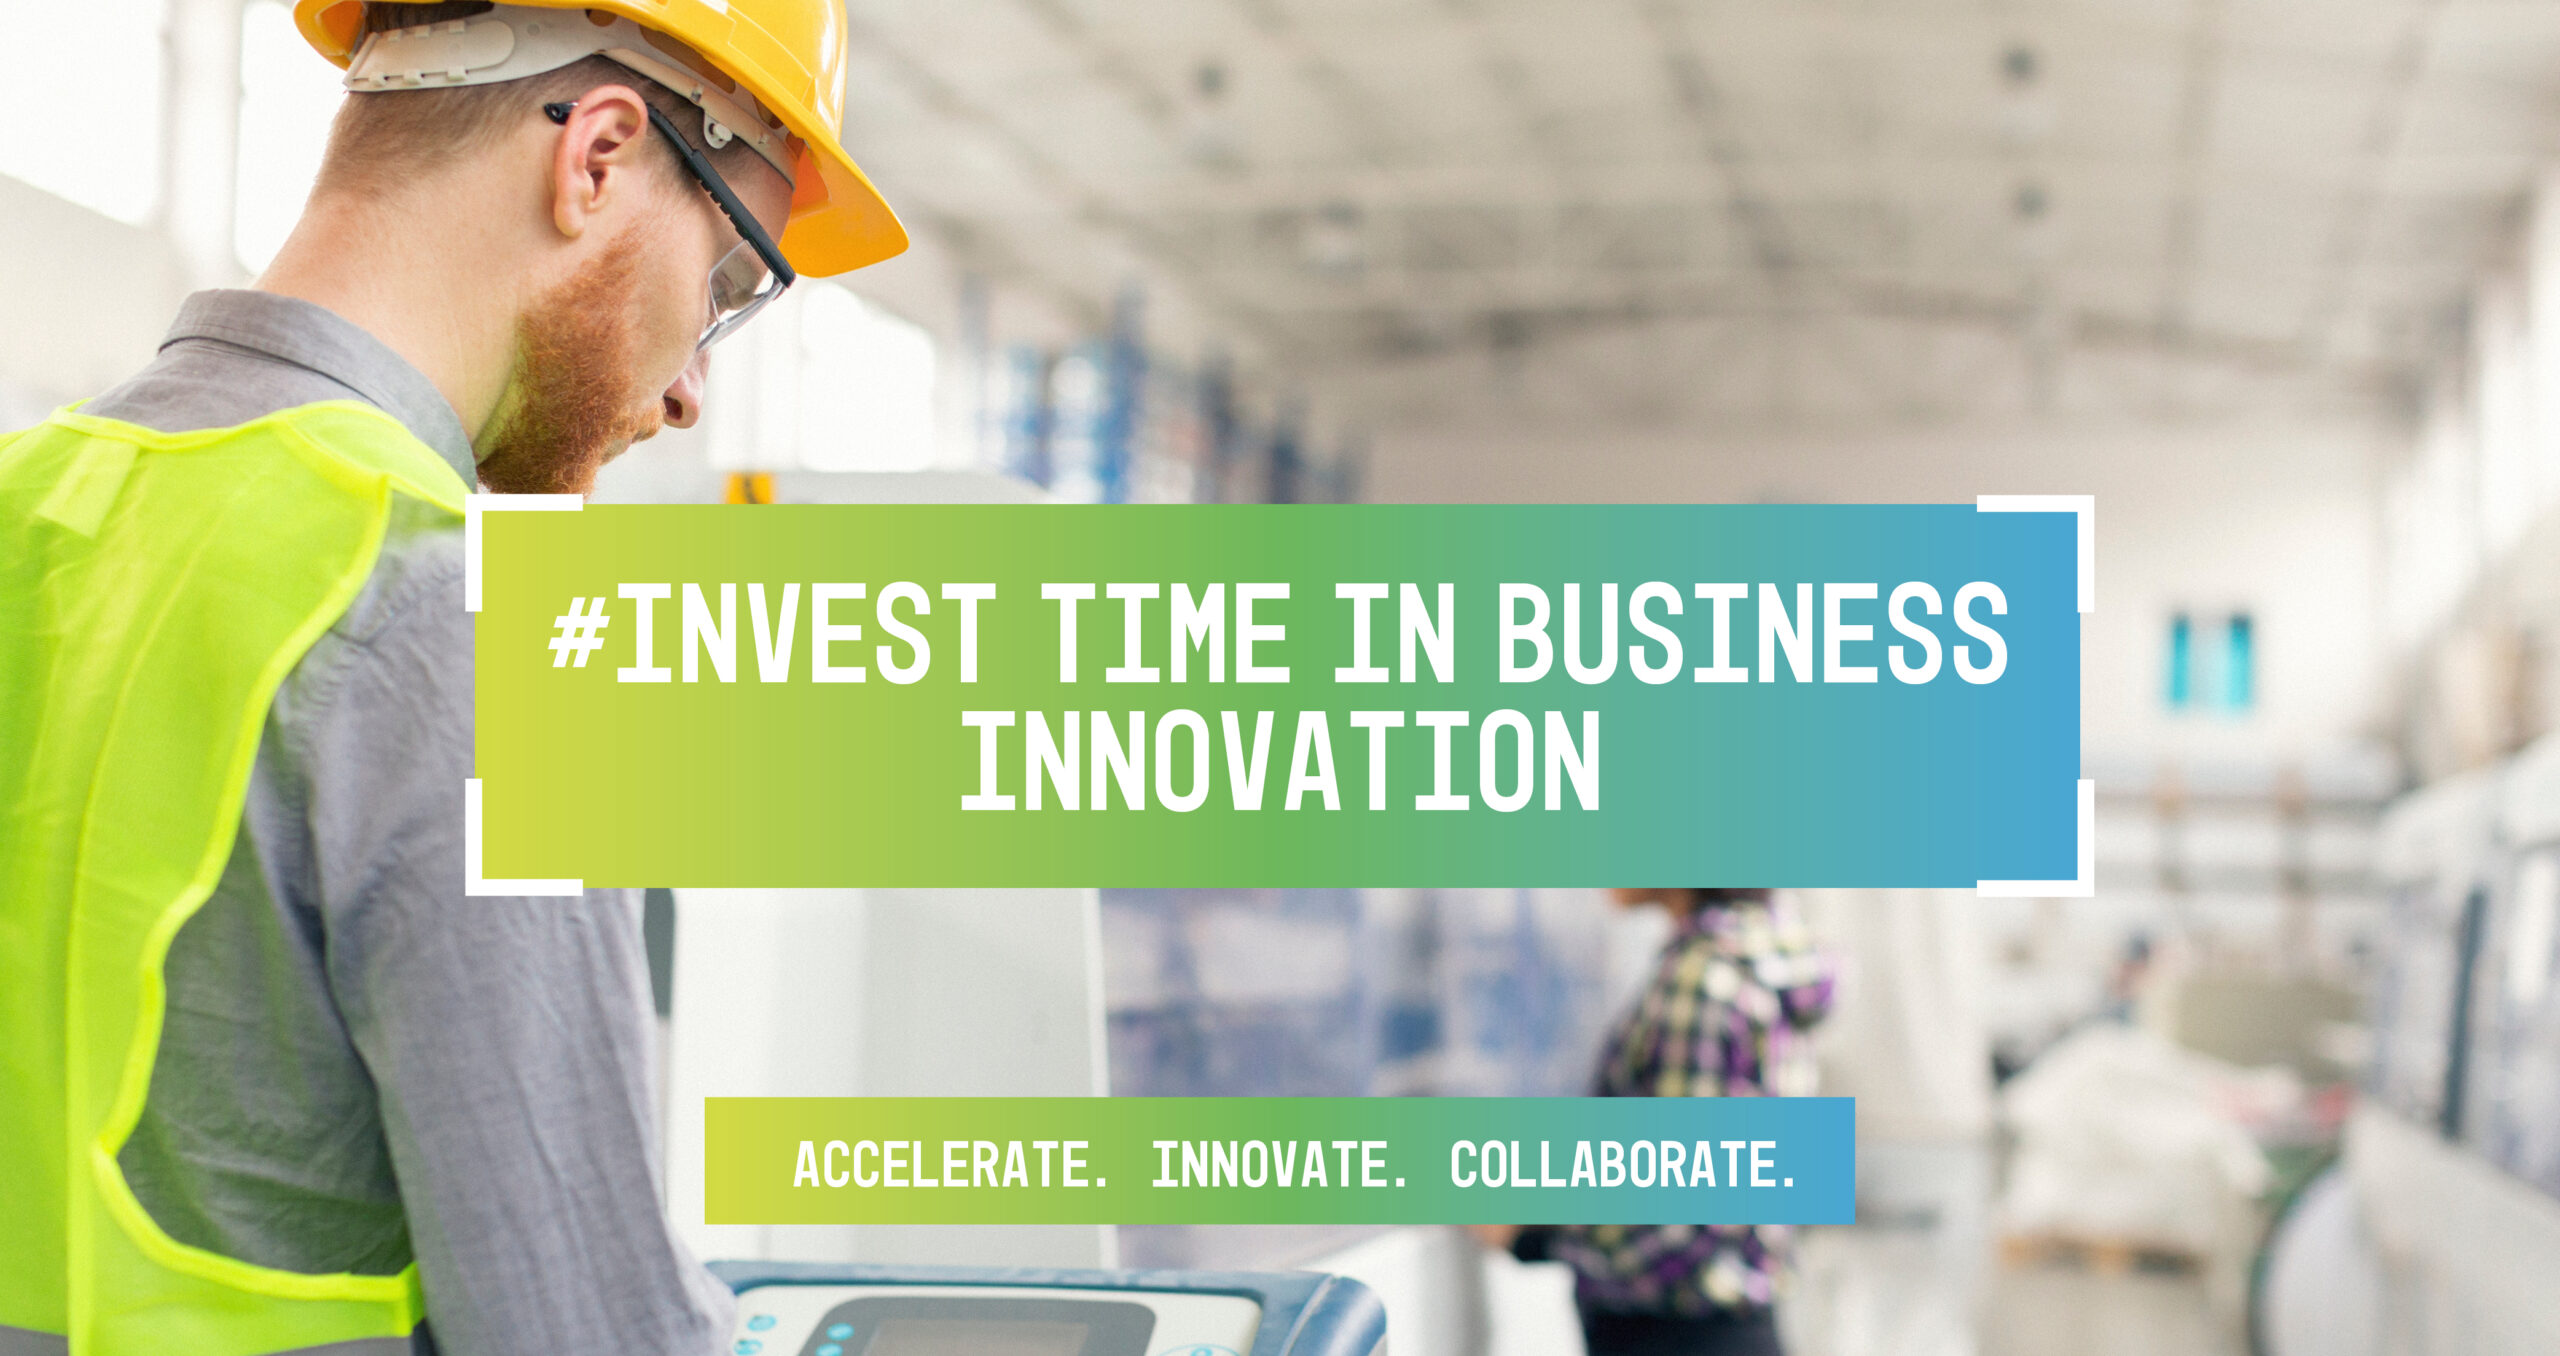 #Invest time in business innovation